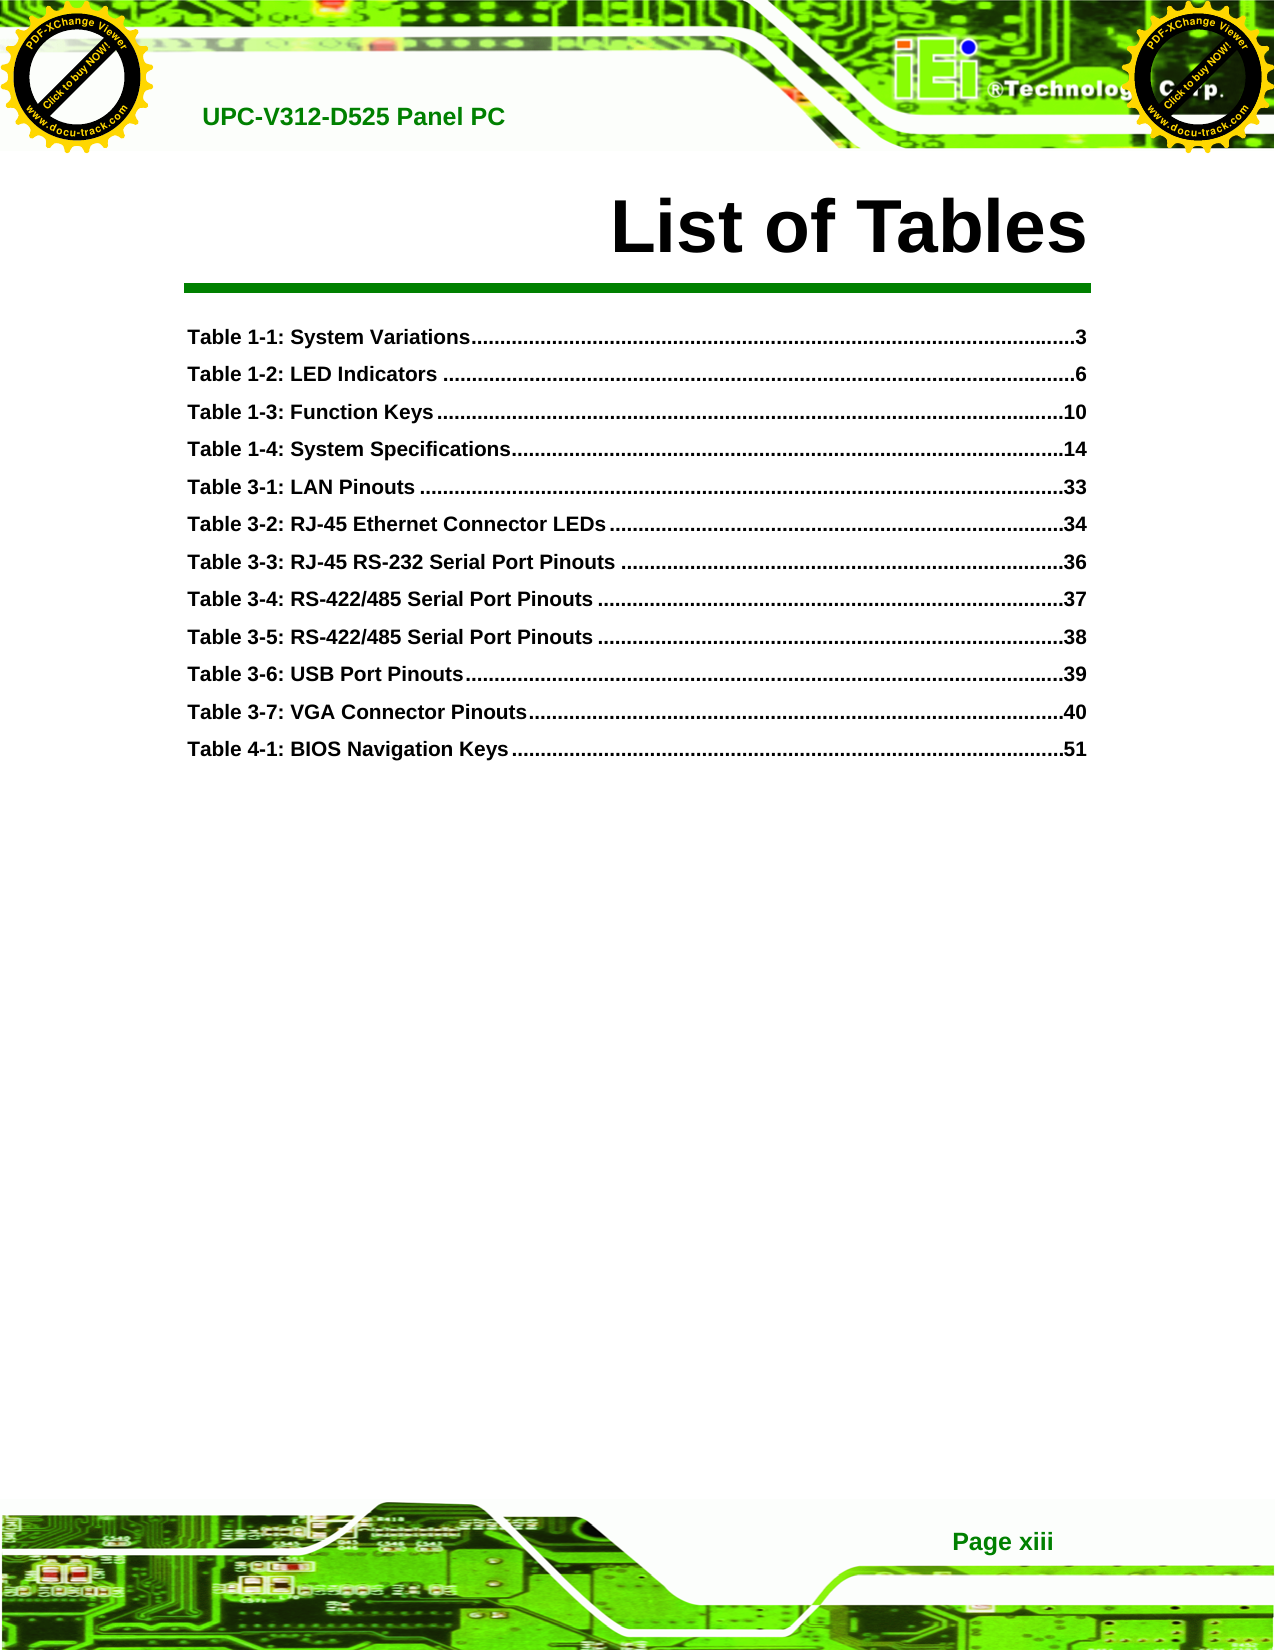   UPC-V312-D525 Panel PC Page xiii List of Tables Table 1-1: System Variations.........................................................................................................3 Table 1-2: LED Indicators ..............................................................................................................6 Table 1-3: Function Keys.............................................................................................................10 Table 1-4: System Specifications................................................................................................14 Table 3-1: LAN Pinouts ................................................................................................................33 Table 3-2: RJ-45 Ethernet Connector LEDs...............................................................................34 Table 3-3: RJ-45 RS-232 Serial Port Pinouts .............................................................................36 Table 3-4: RS-422/485 Serial Port Pinouts .................................................................................37 Table 3-5: RS-422/485 Serial Port Pinouts .................................................................................38 Table 3-6: USB Port Pinouts........................................................................................................39 Table 3-7: VGA Connector Pinouts.............................................................................................40 Table 4-1: BIOS Navigation Keys................................................................................................51  Click to buy NOW!PDF-XChange Viewerwww.docu-track.comClick to buy NOW!PDF-XChange Viewerwww.docu-track.com